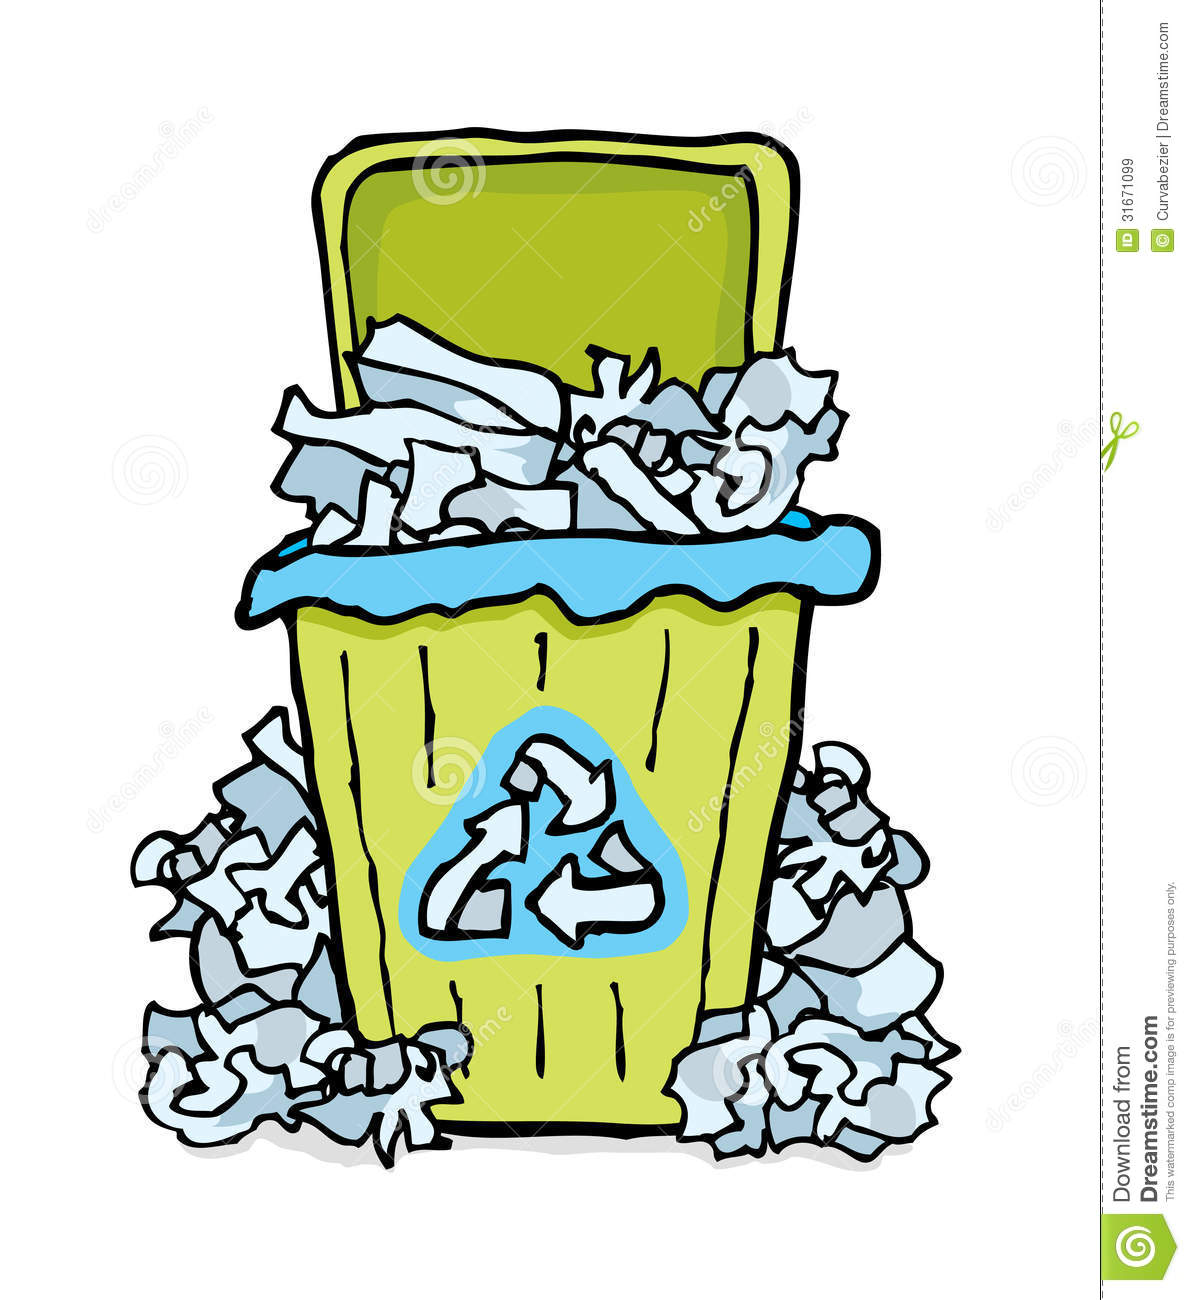 Recycling Paper Bin Royalty Free Stock Images   Image  31671099